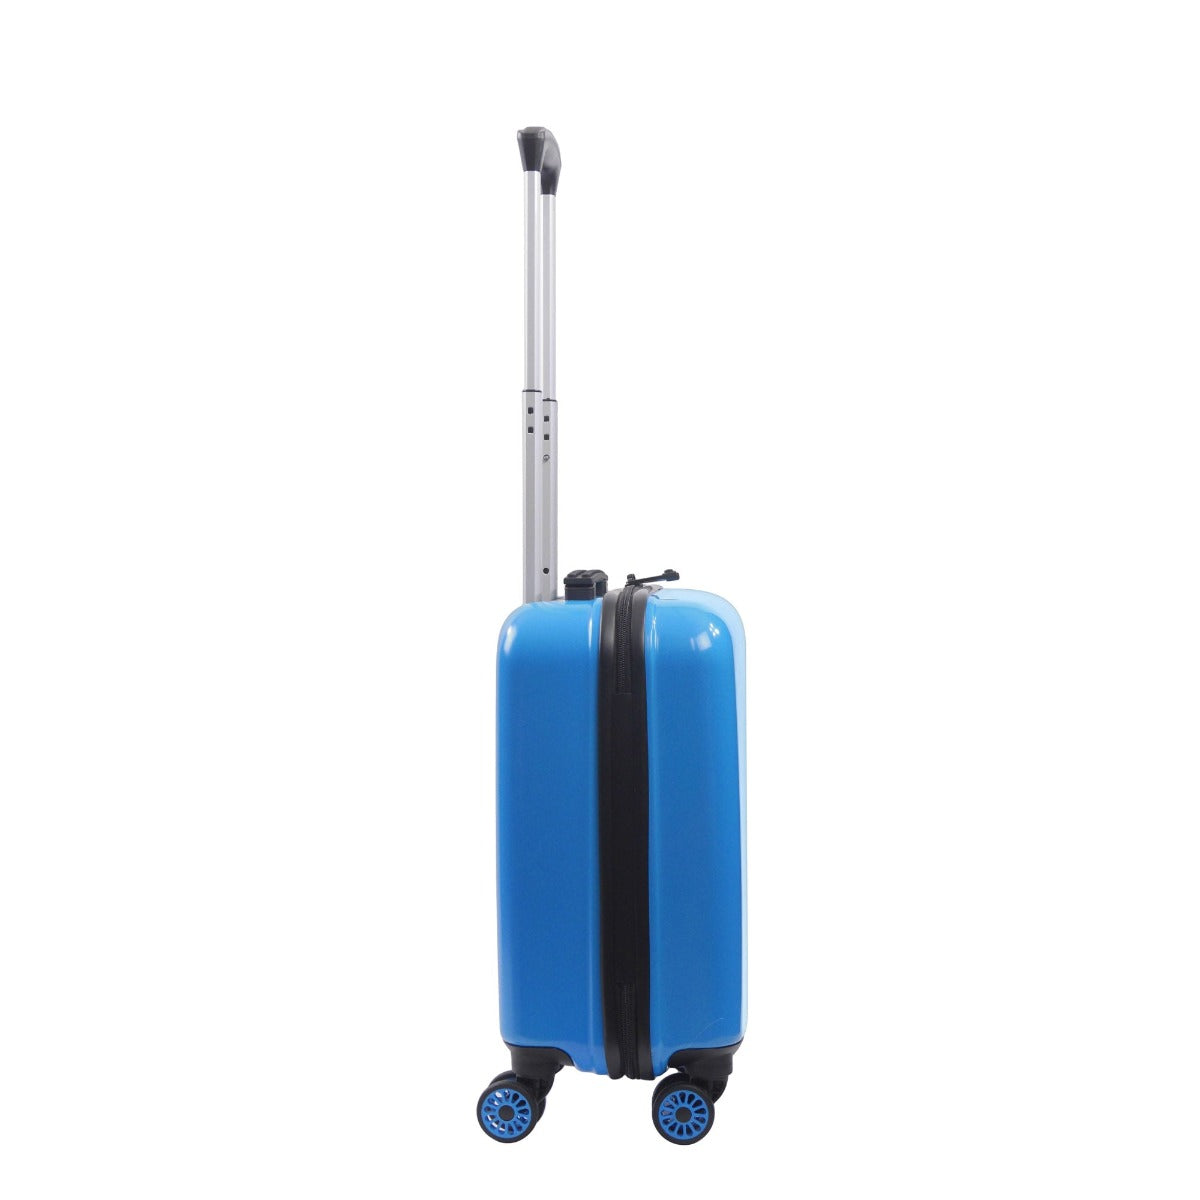 Light Blue Lego Play Date Minifigures Today I Feel 18" suitcase - best carry-on rolling luggage for kids